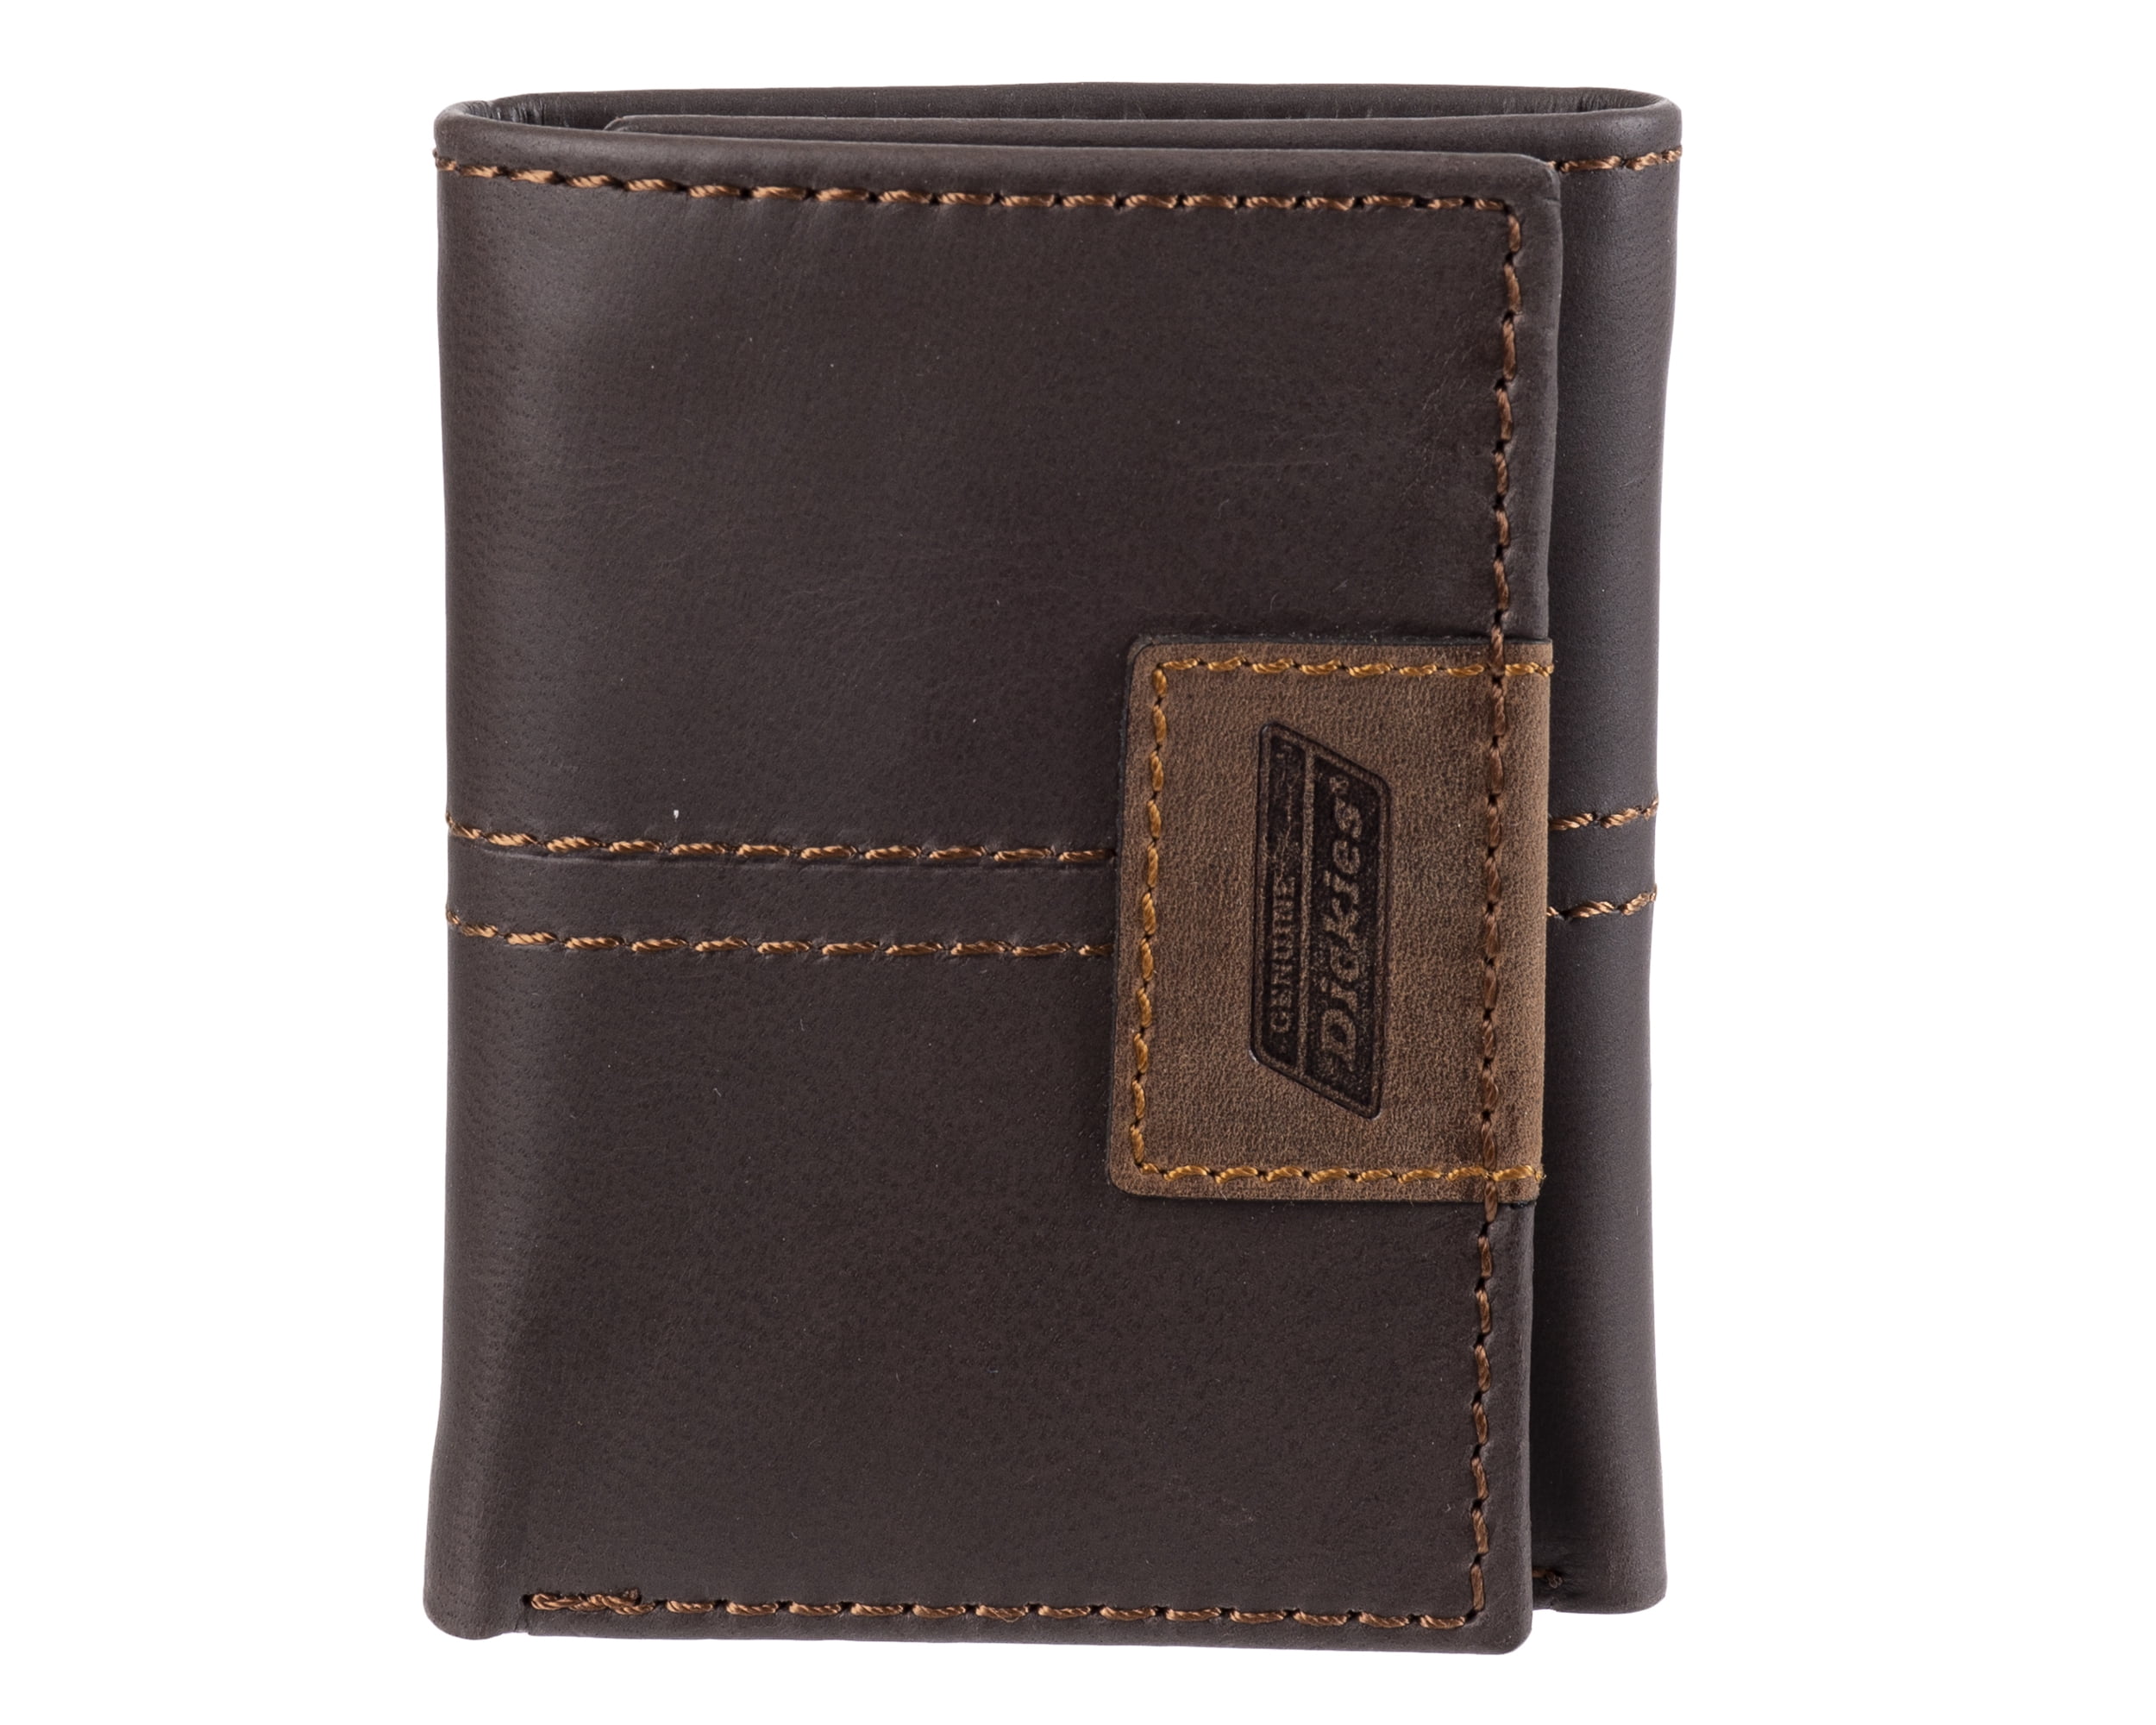 Genuine Dickies Men's Leather Trifold Wallet with Zipper